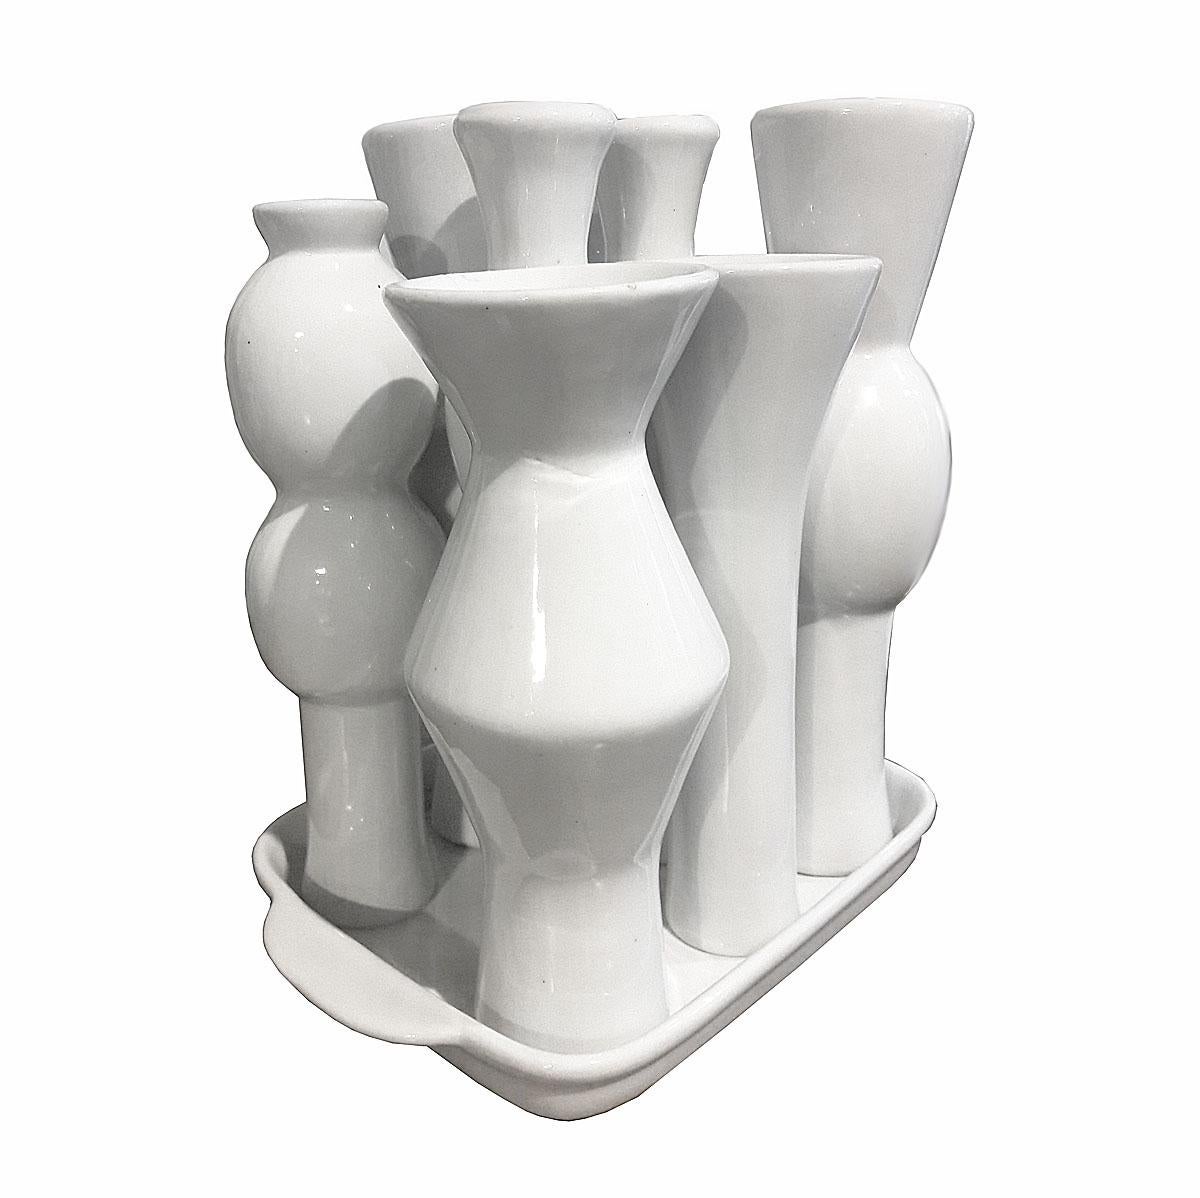 A handmade white porcelain sculpture of eight vases in different shapes and sizes resting on a tray. Contemporary design. From Netherlands, early 2000s.